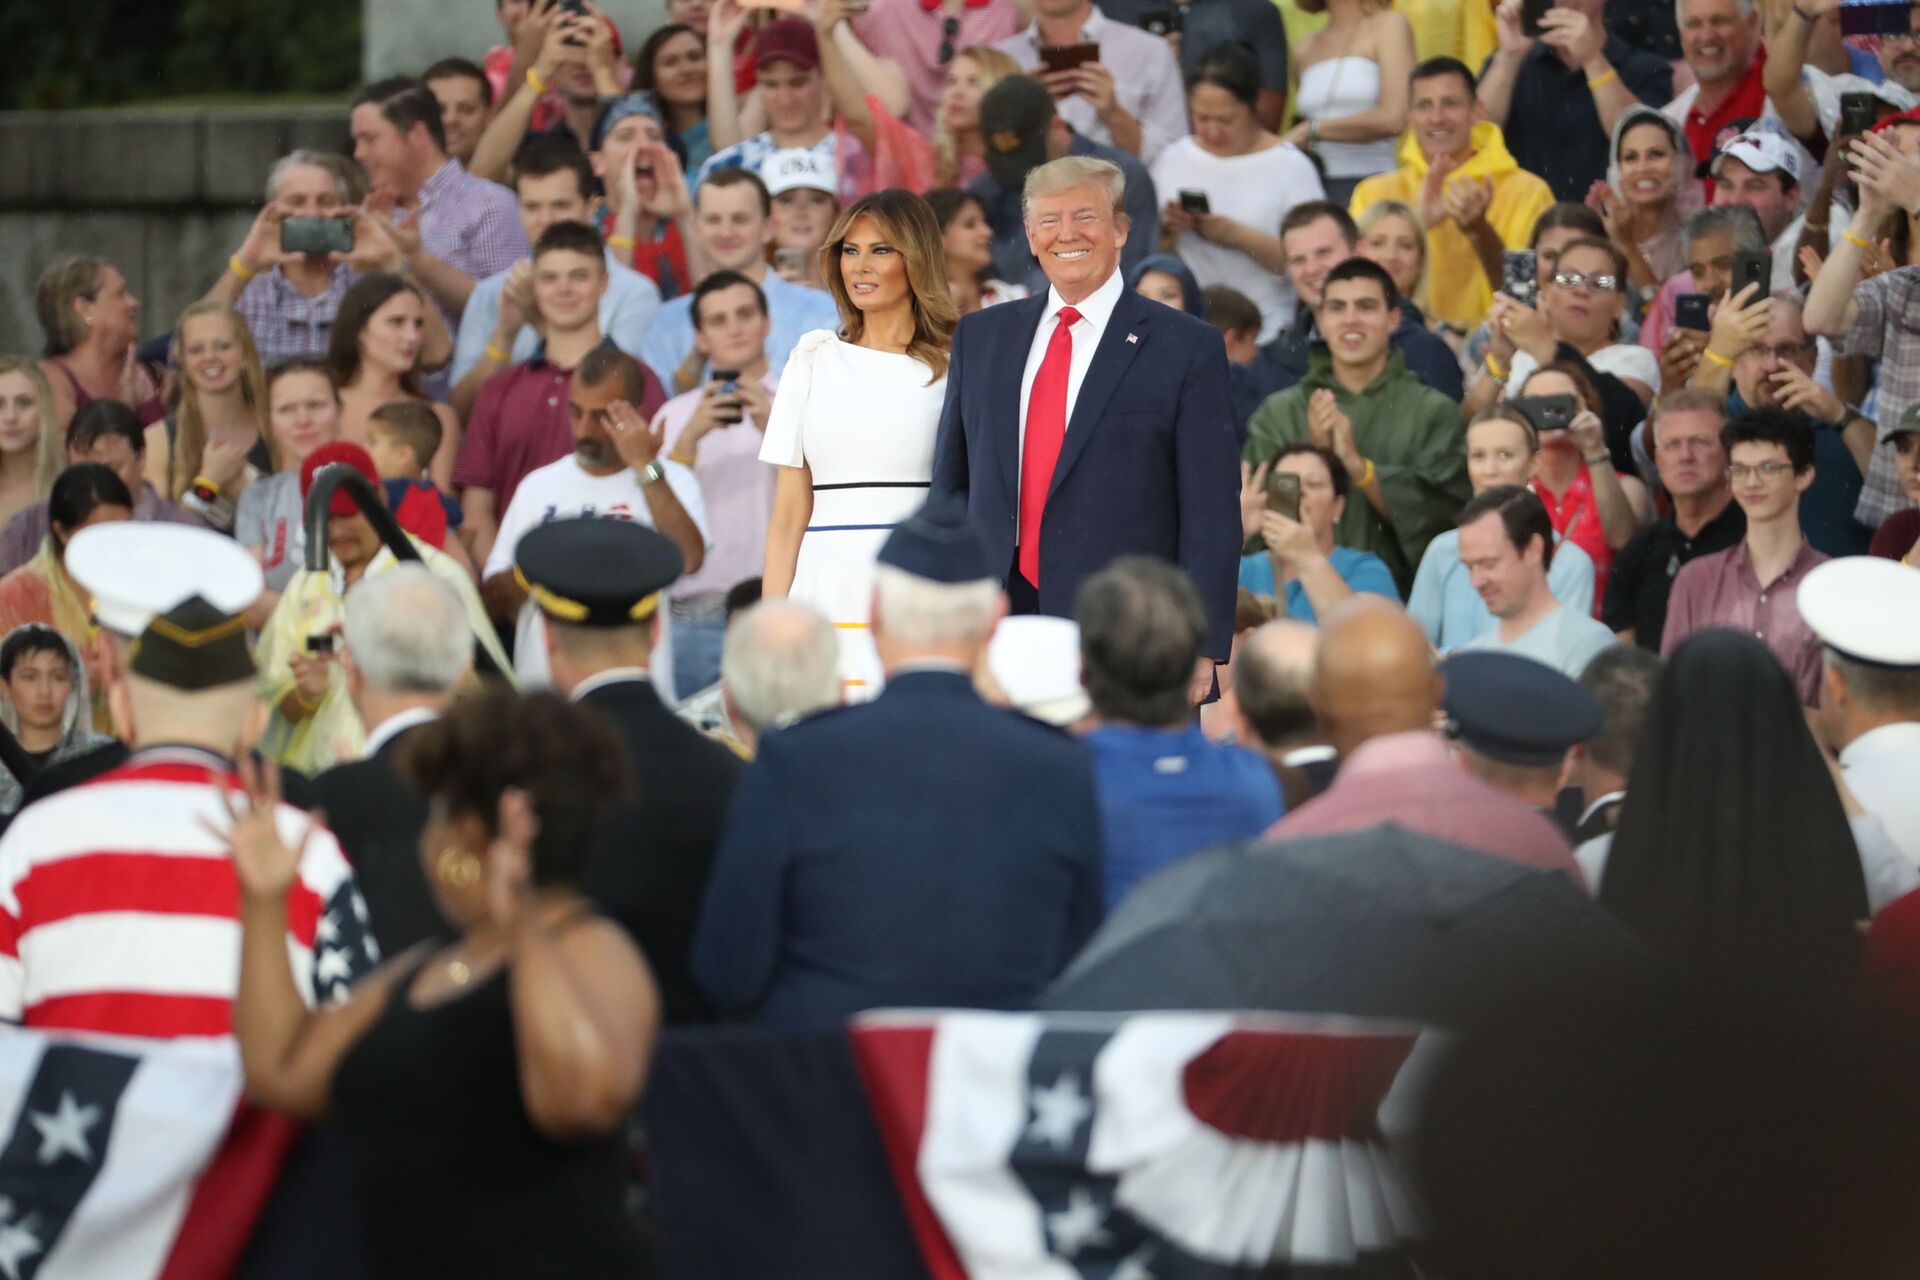 President Donald Trump and first lady Melania Trump, arrives speaks to an Independence Day celebration in front of the Lincoln Memorial in Washington, Thursday, July 4, 2019. (AP Photo/Andrew Harnik) - Sputnik International, 1920, 07.09.2021